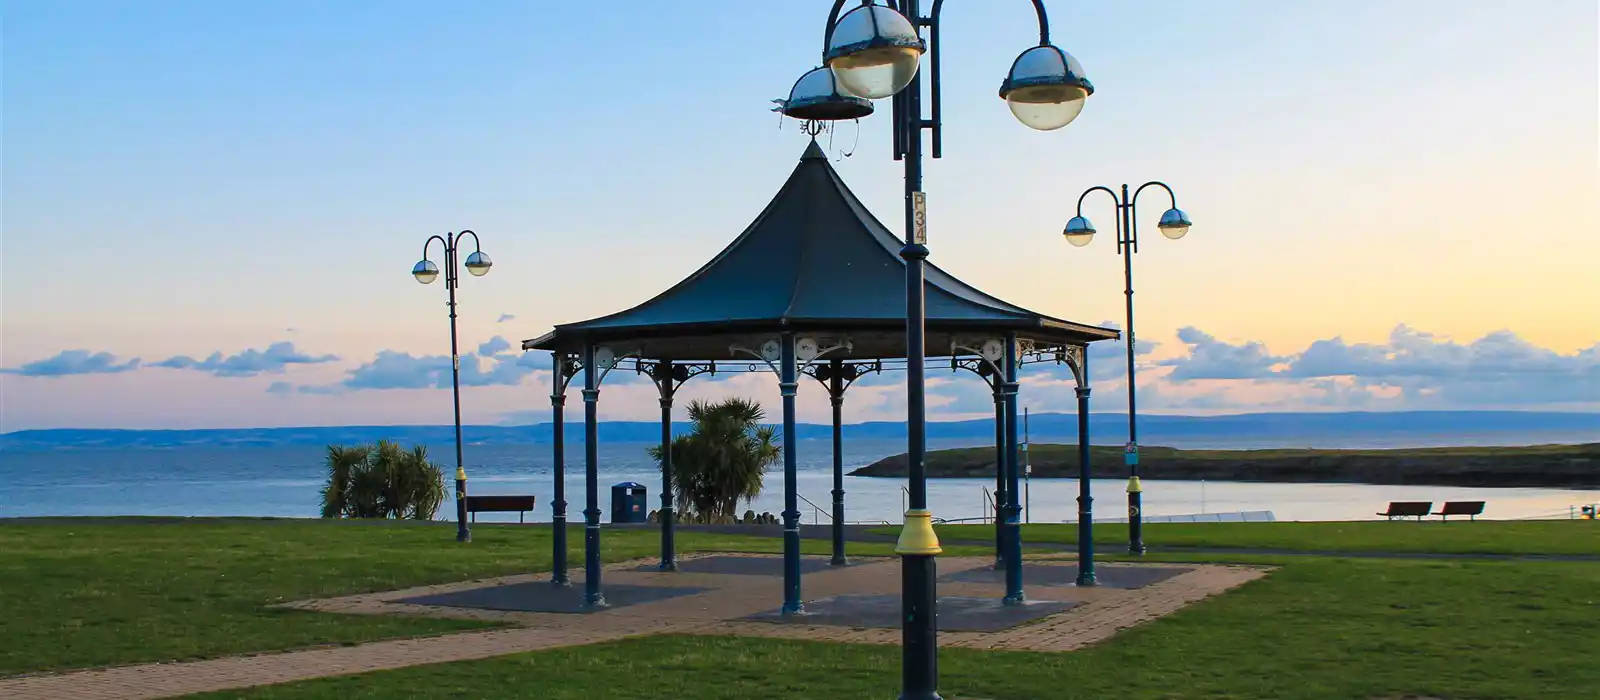 Band Stand at Barry, Vale of Glamorgan